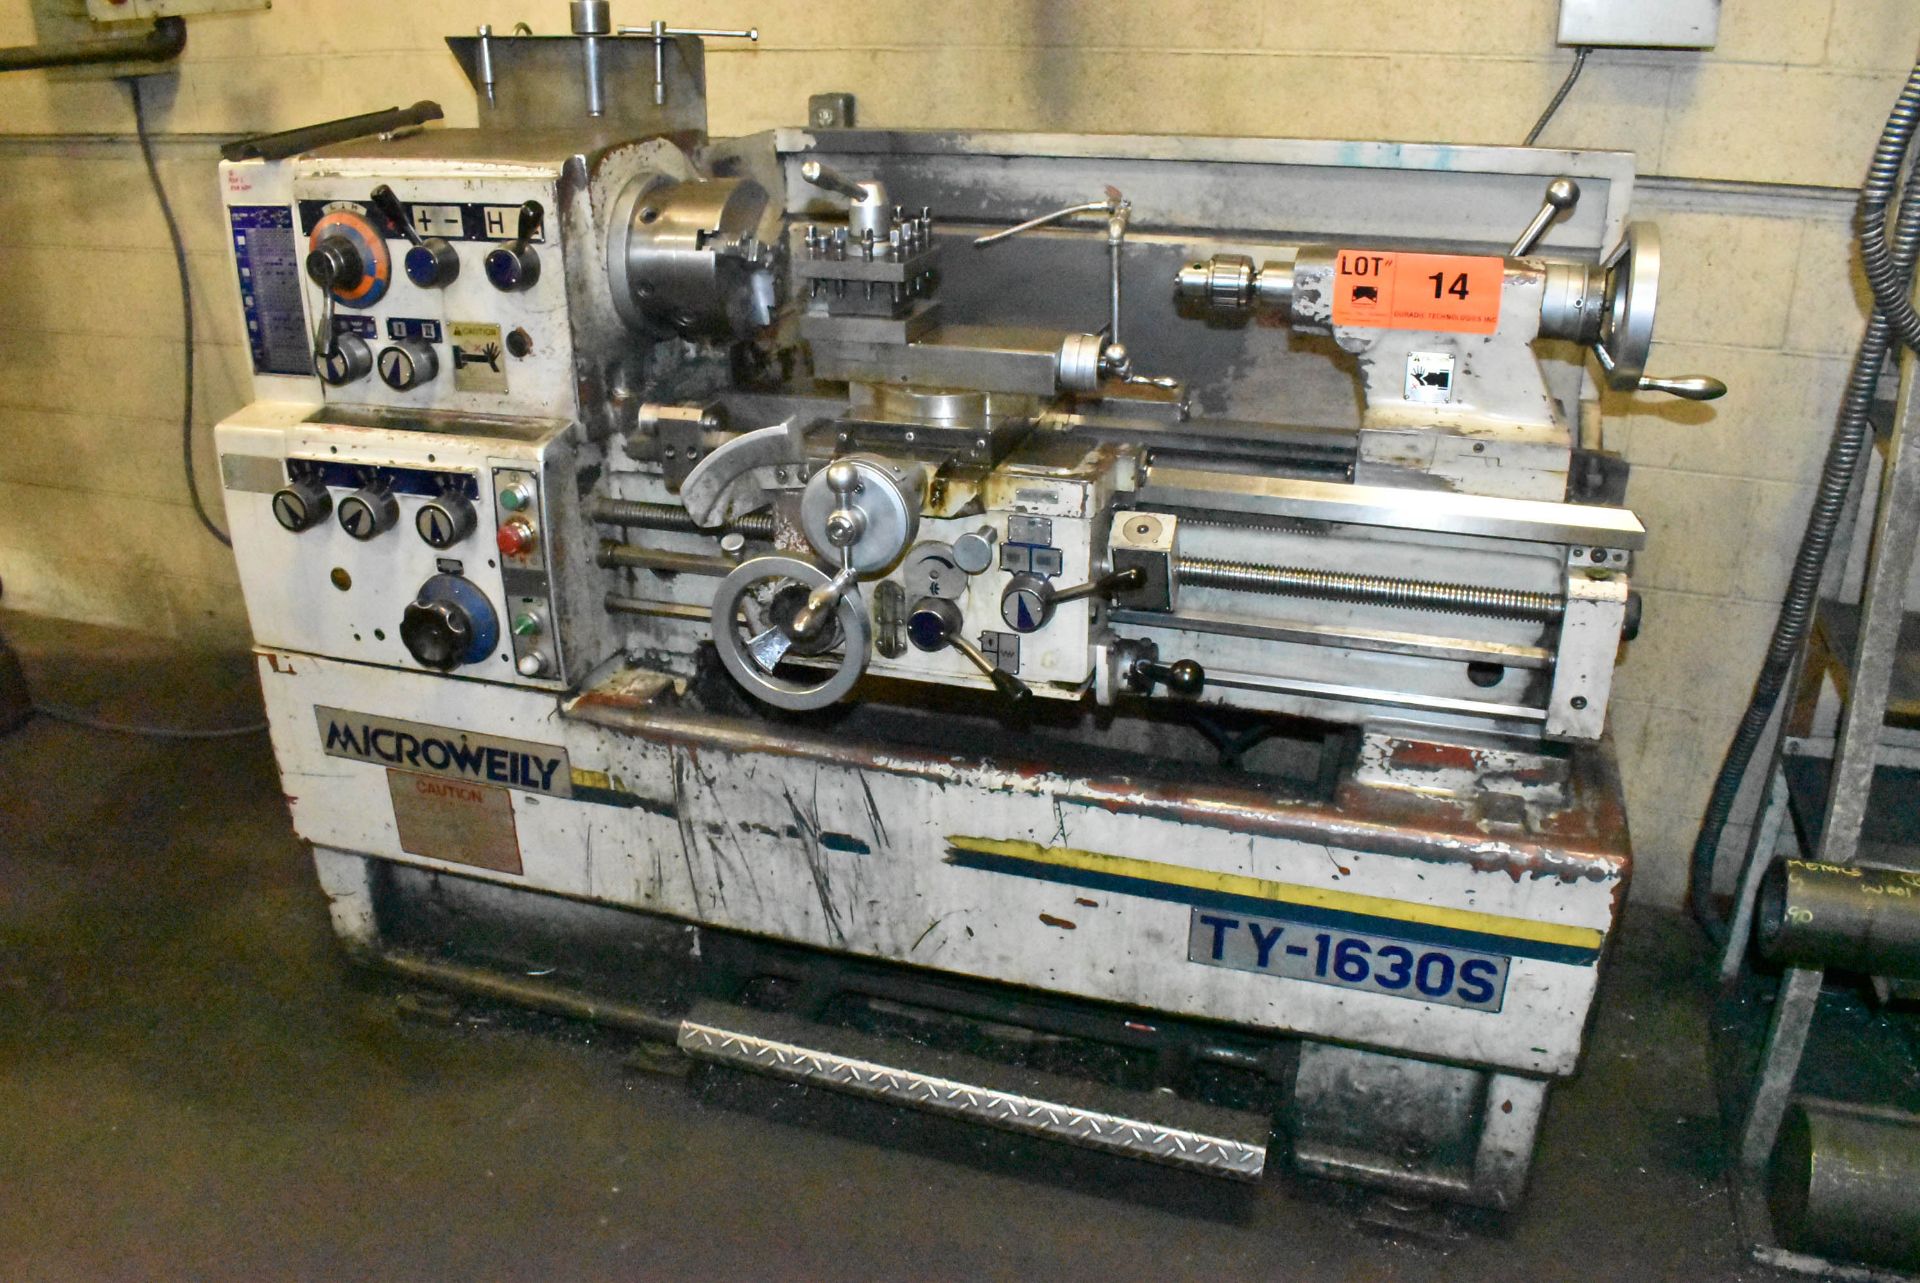 MICROWEILY (2001) TY-1630S ENGINE LATHE WITH 8" 3 JAW CHUCK 16" SWING OVER BED, 30" BETWEEN CENTERS,